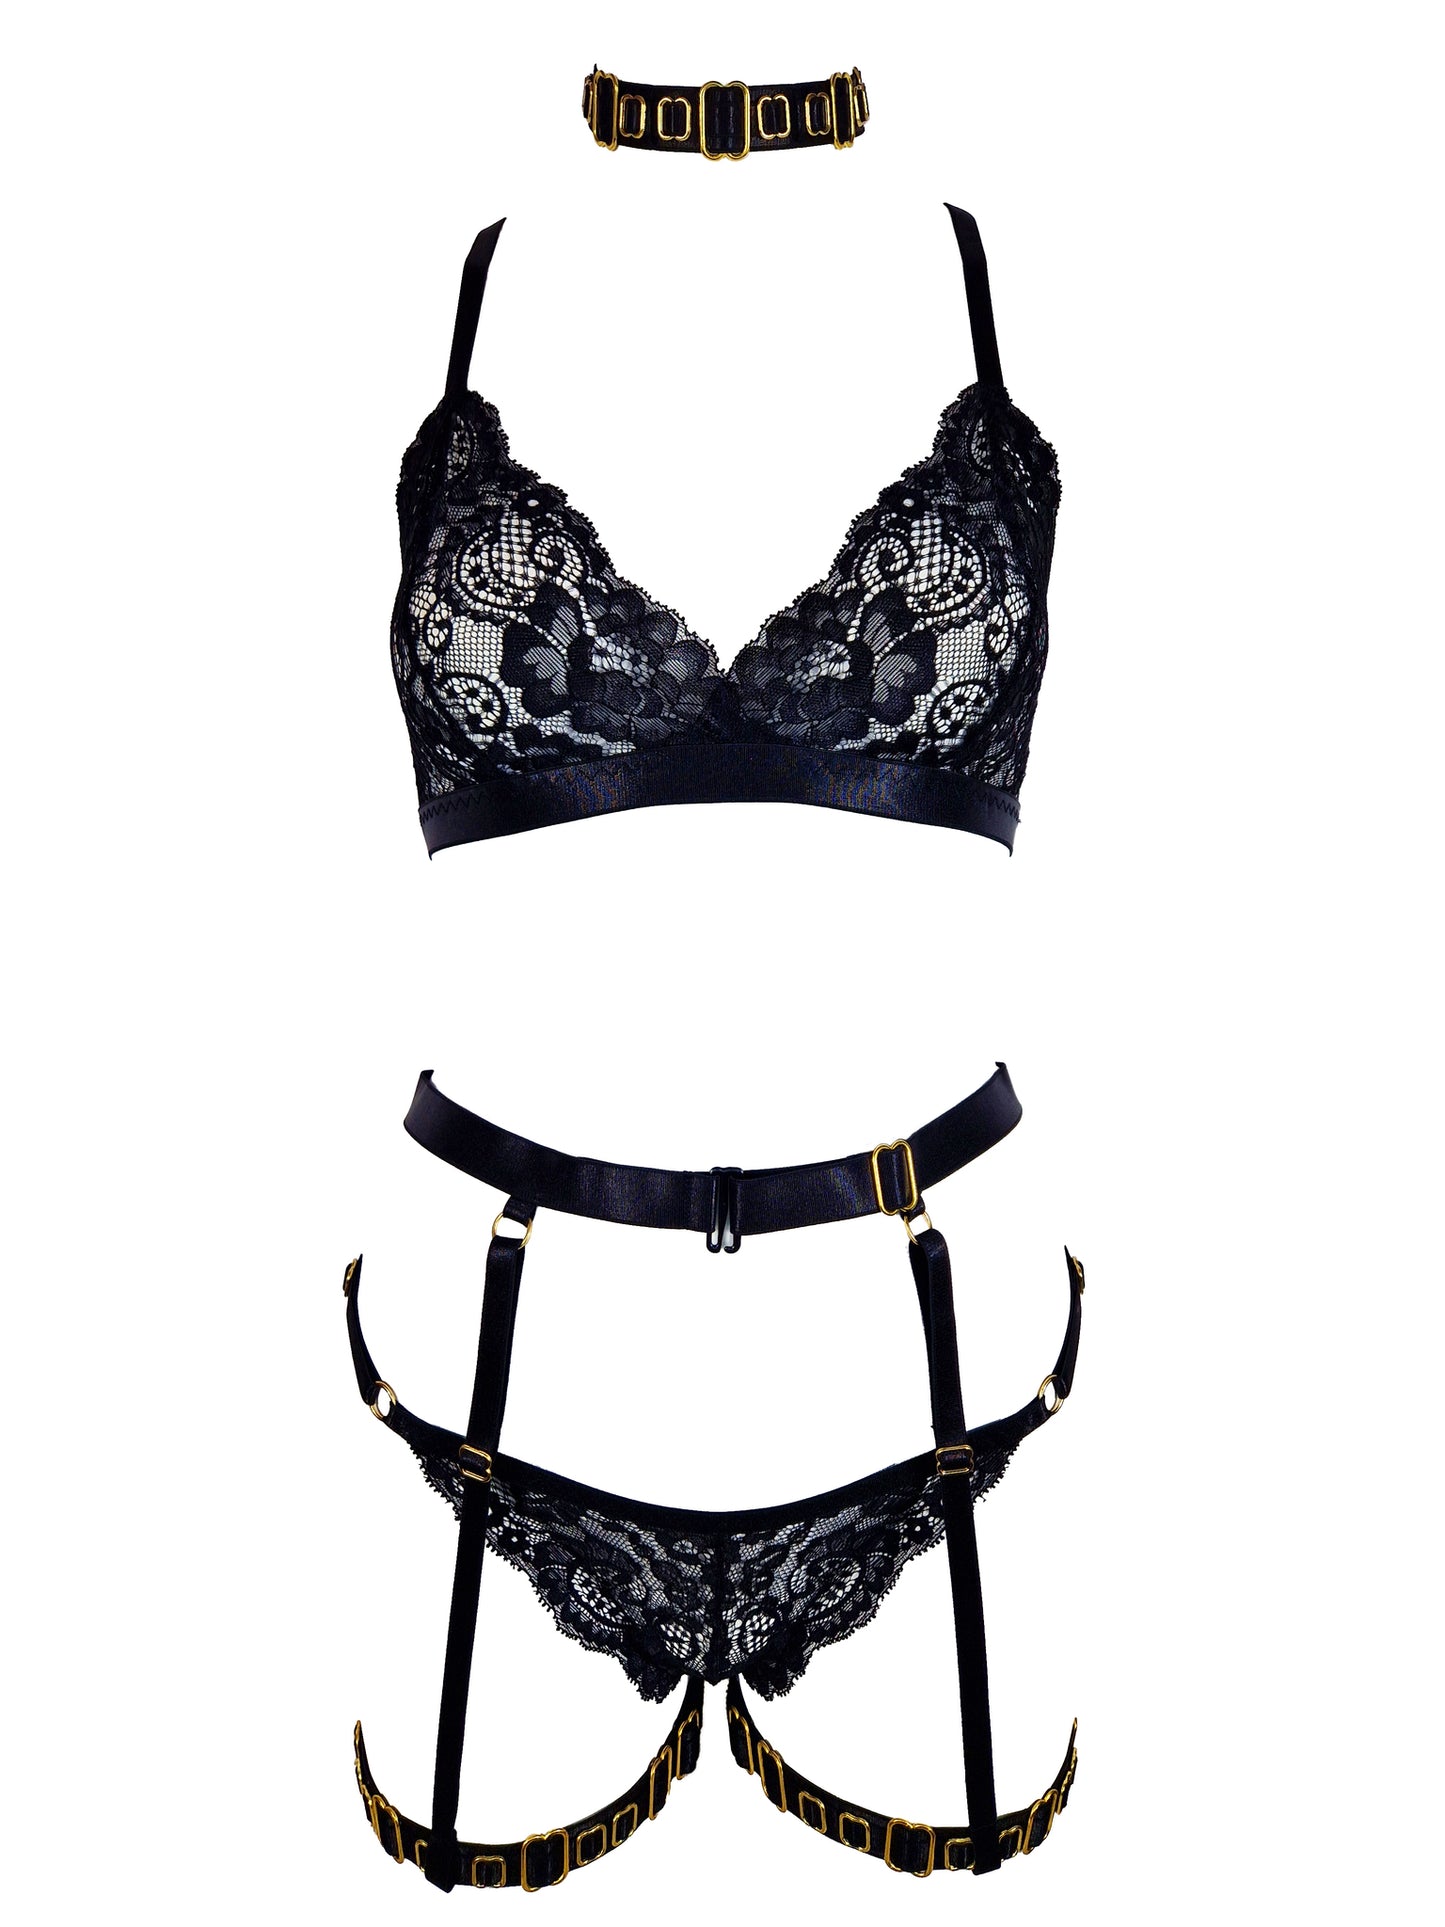 Golden Flame III lace lingerie set with crotchless panties and garters black